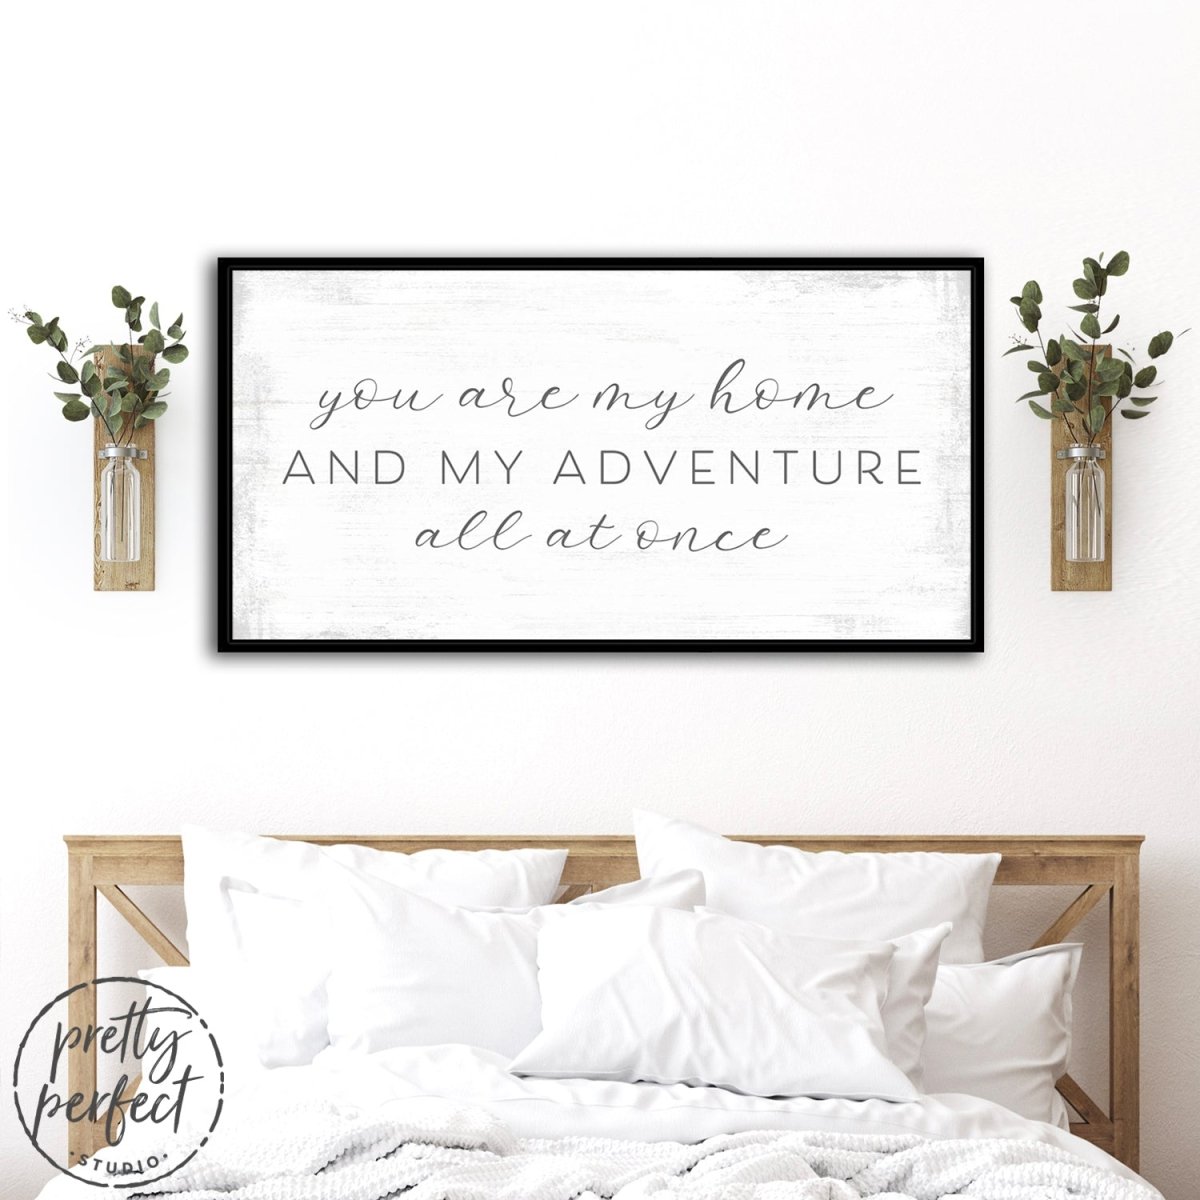 You Are My Home and My Adventure All at Once Sign Above Bed in Master Bedroom - Pretty Perfect Studio